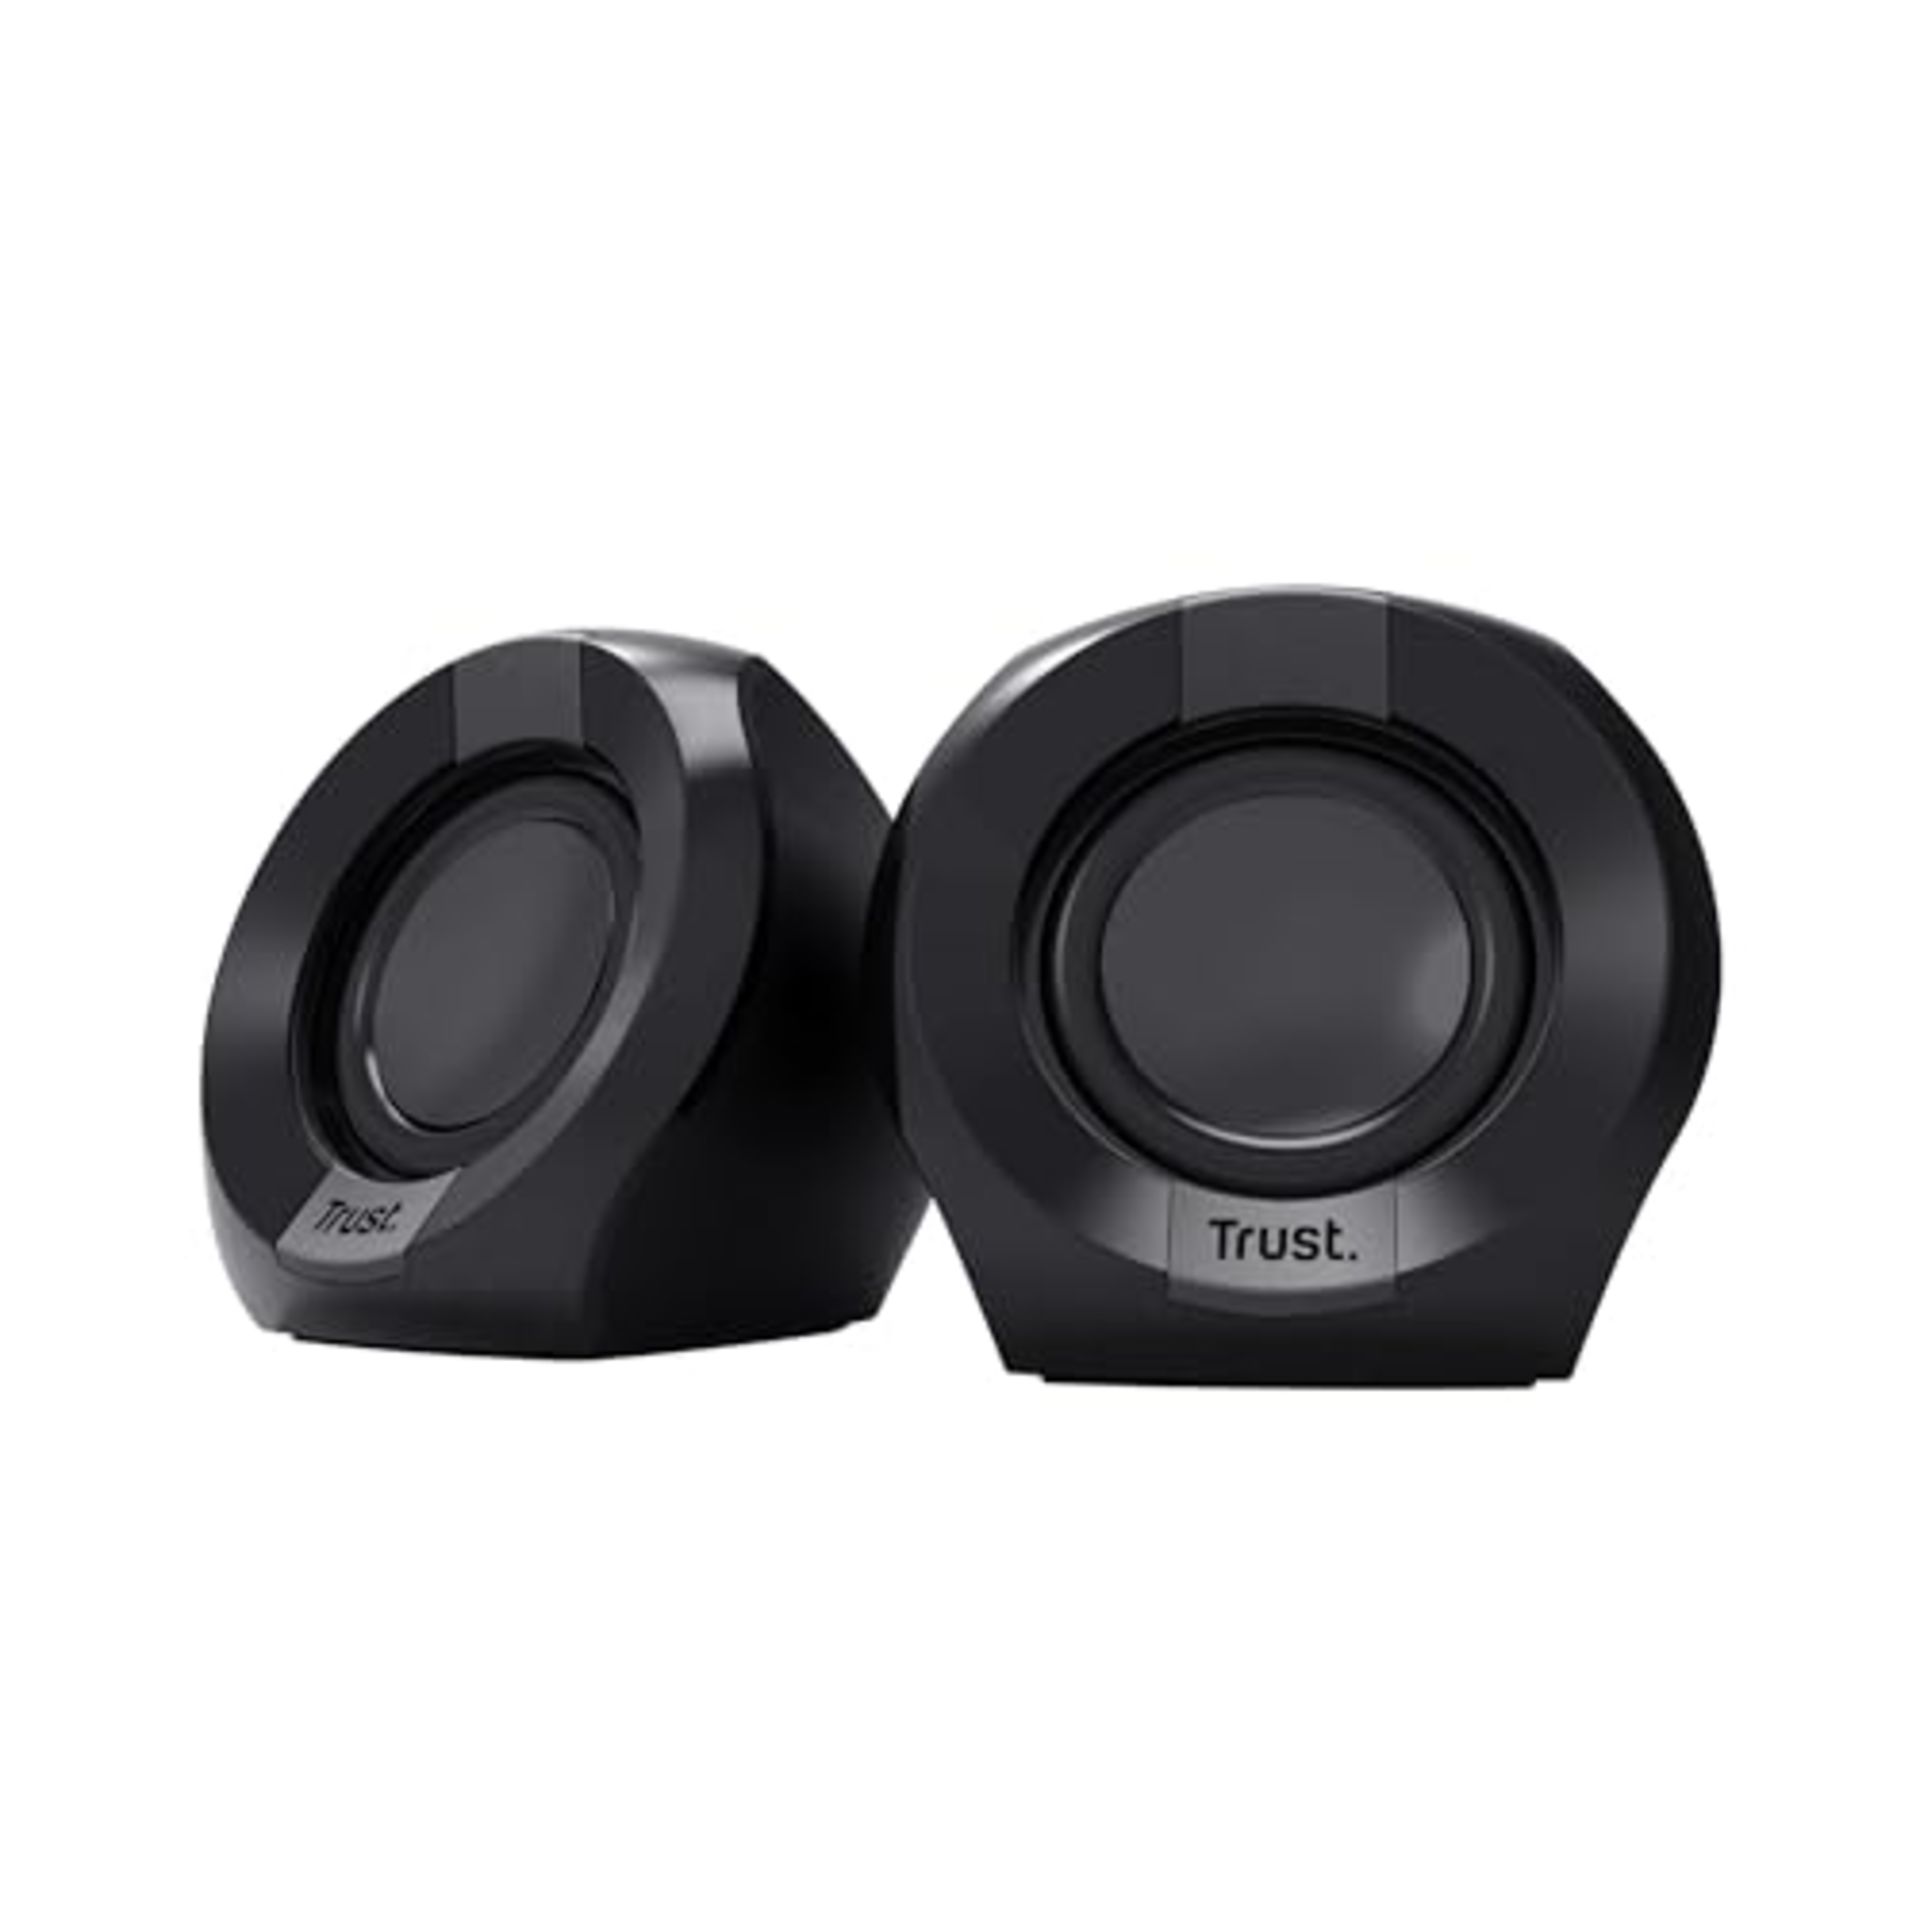 Trust Polo Small PC Speakers 2.0, 8W (4W RMS), Compact speaker set, USB powered speake - Image 4 of 6